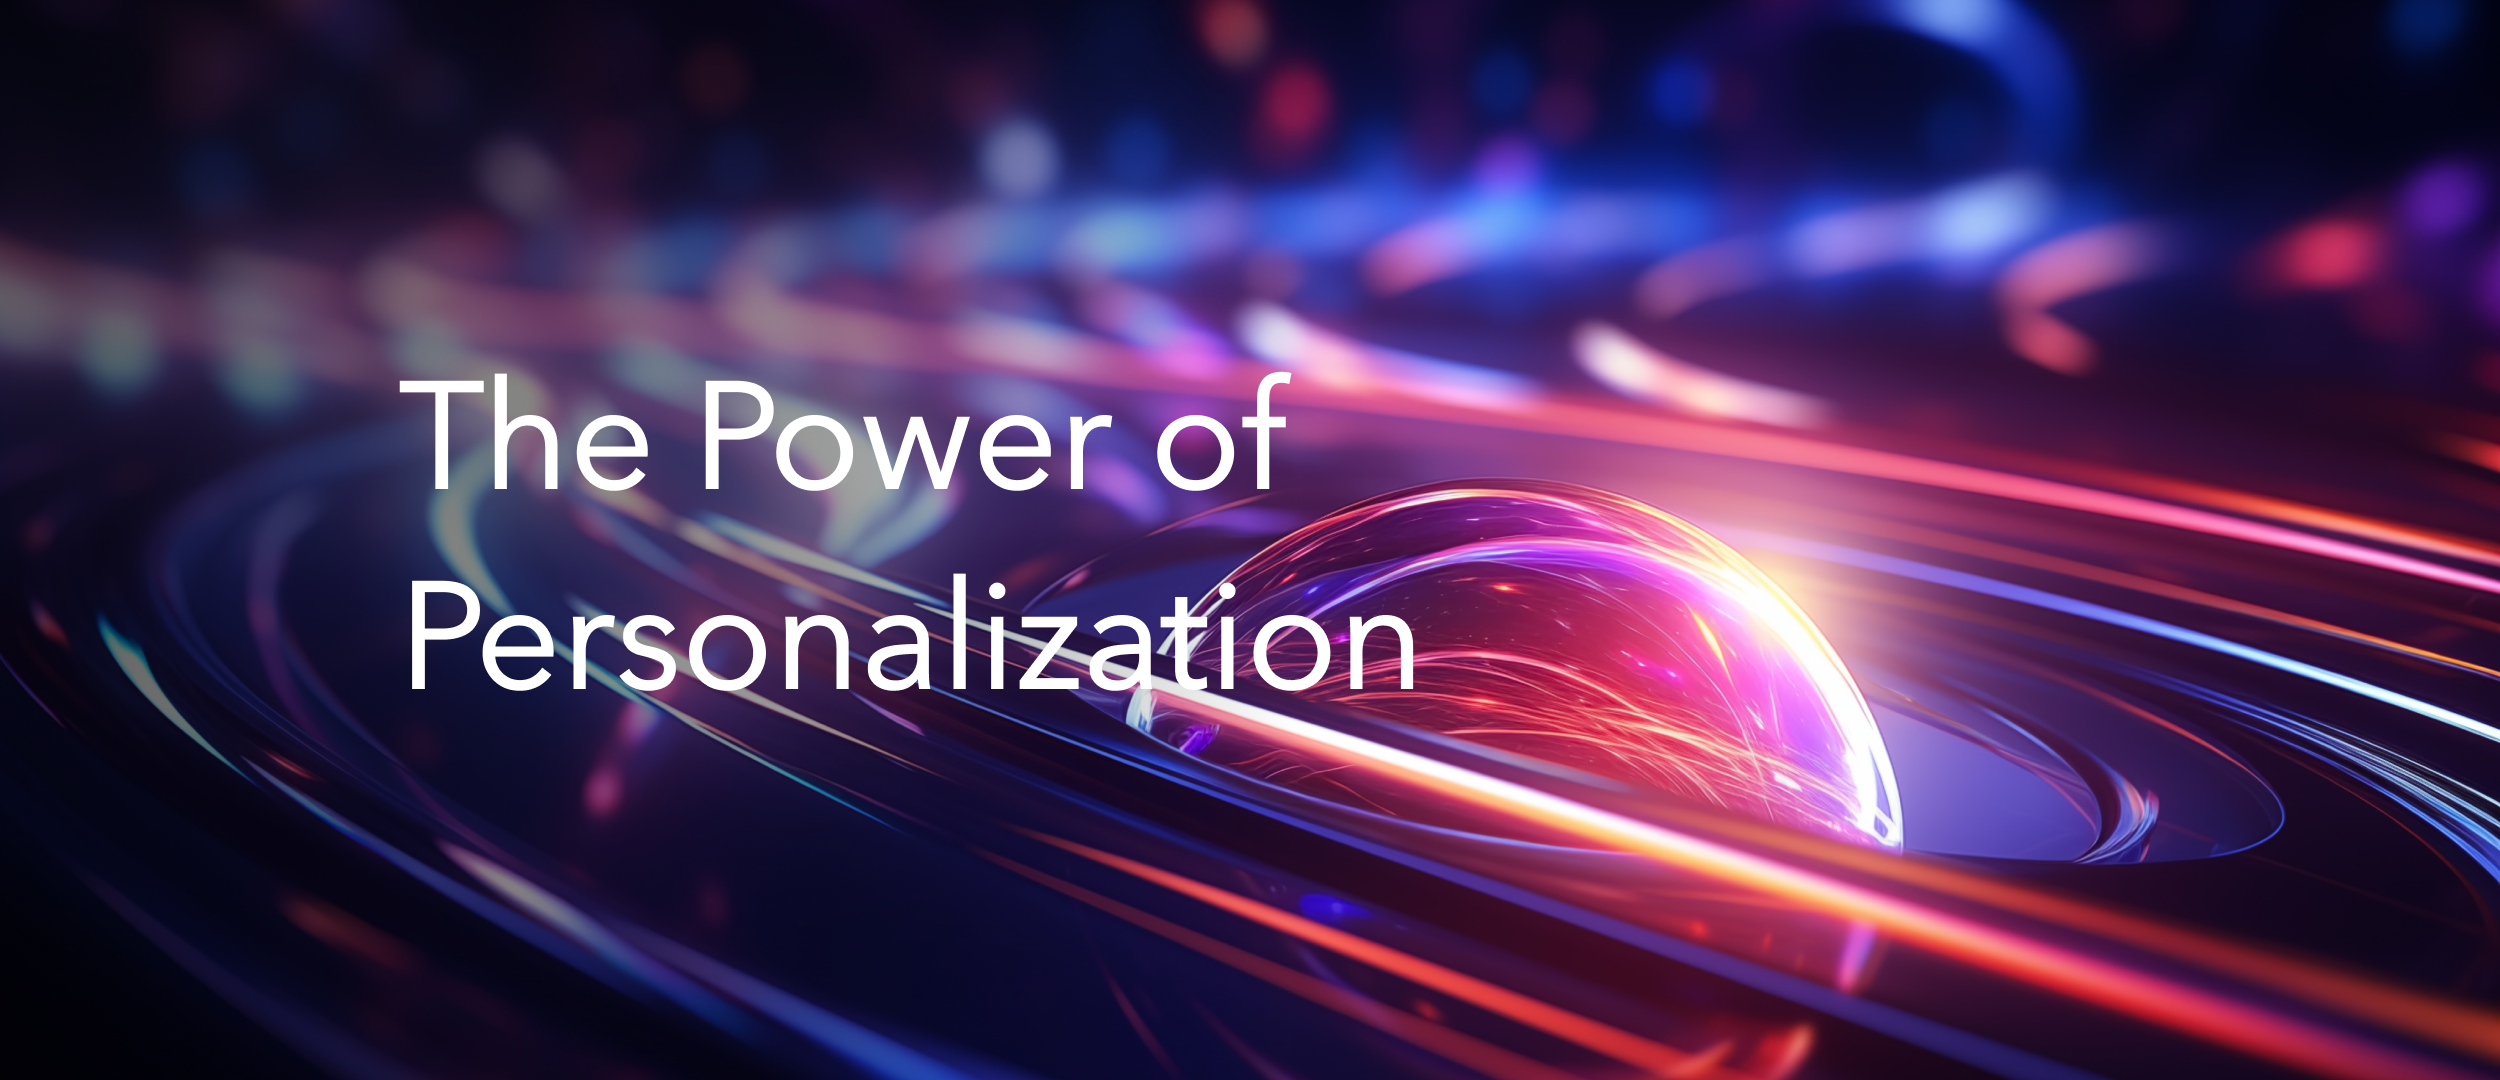 The New Rules for Digital Transformation: Crafting Connections & The Power of Personalization in Digital Transformation